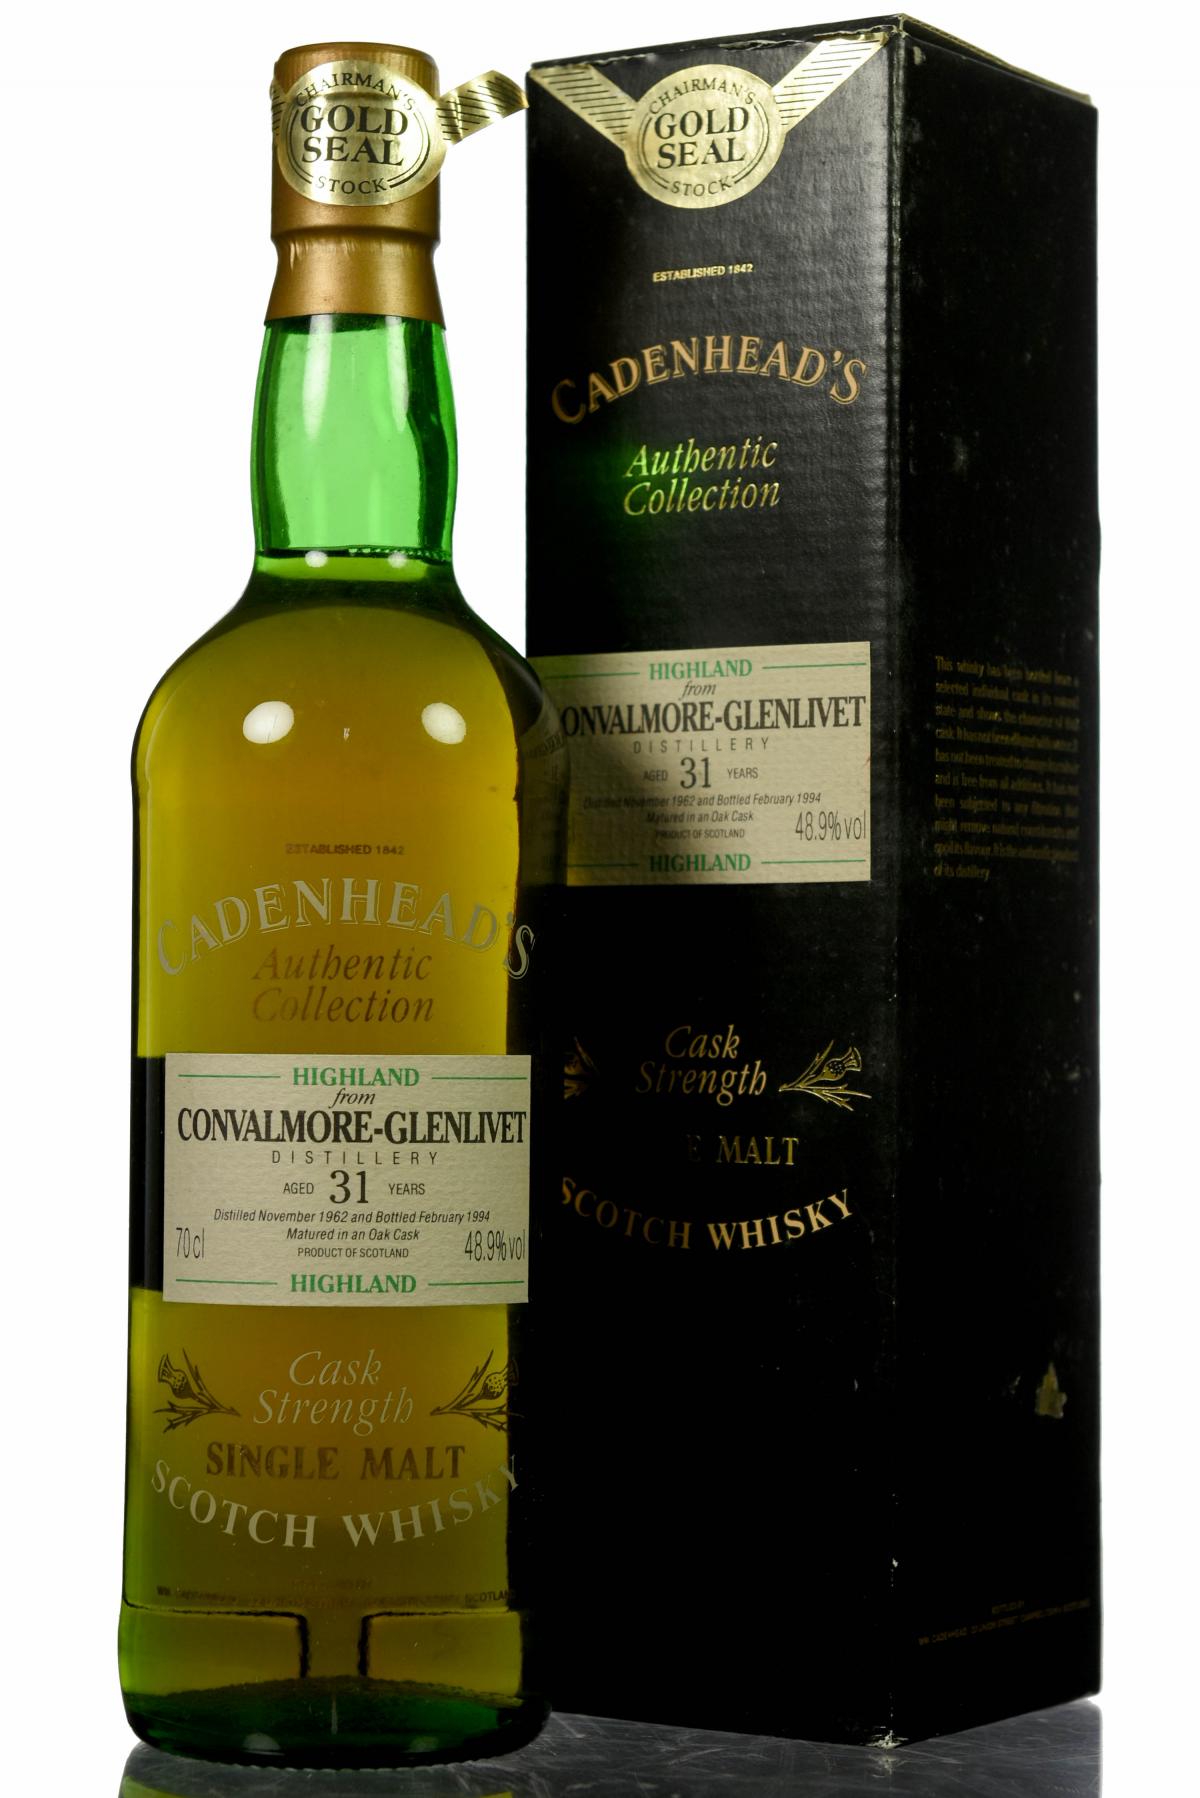 Convalmore-Glenlivet 1962-1994 - 31 Year Old - Cadenheads Authentic Collection